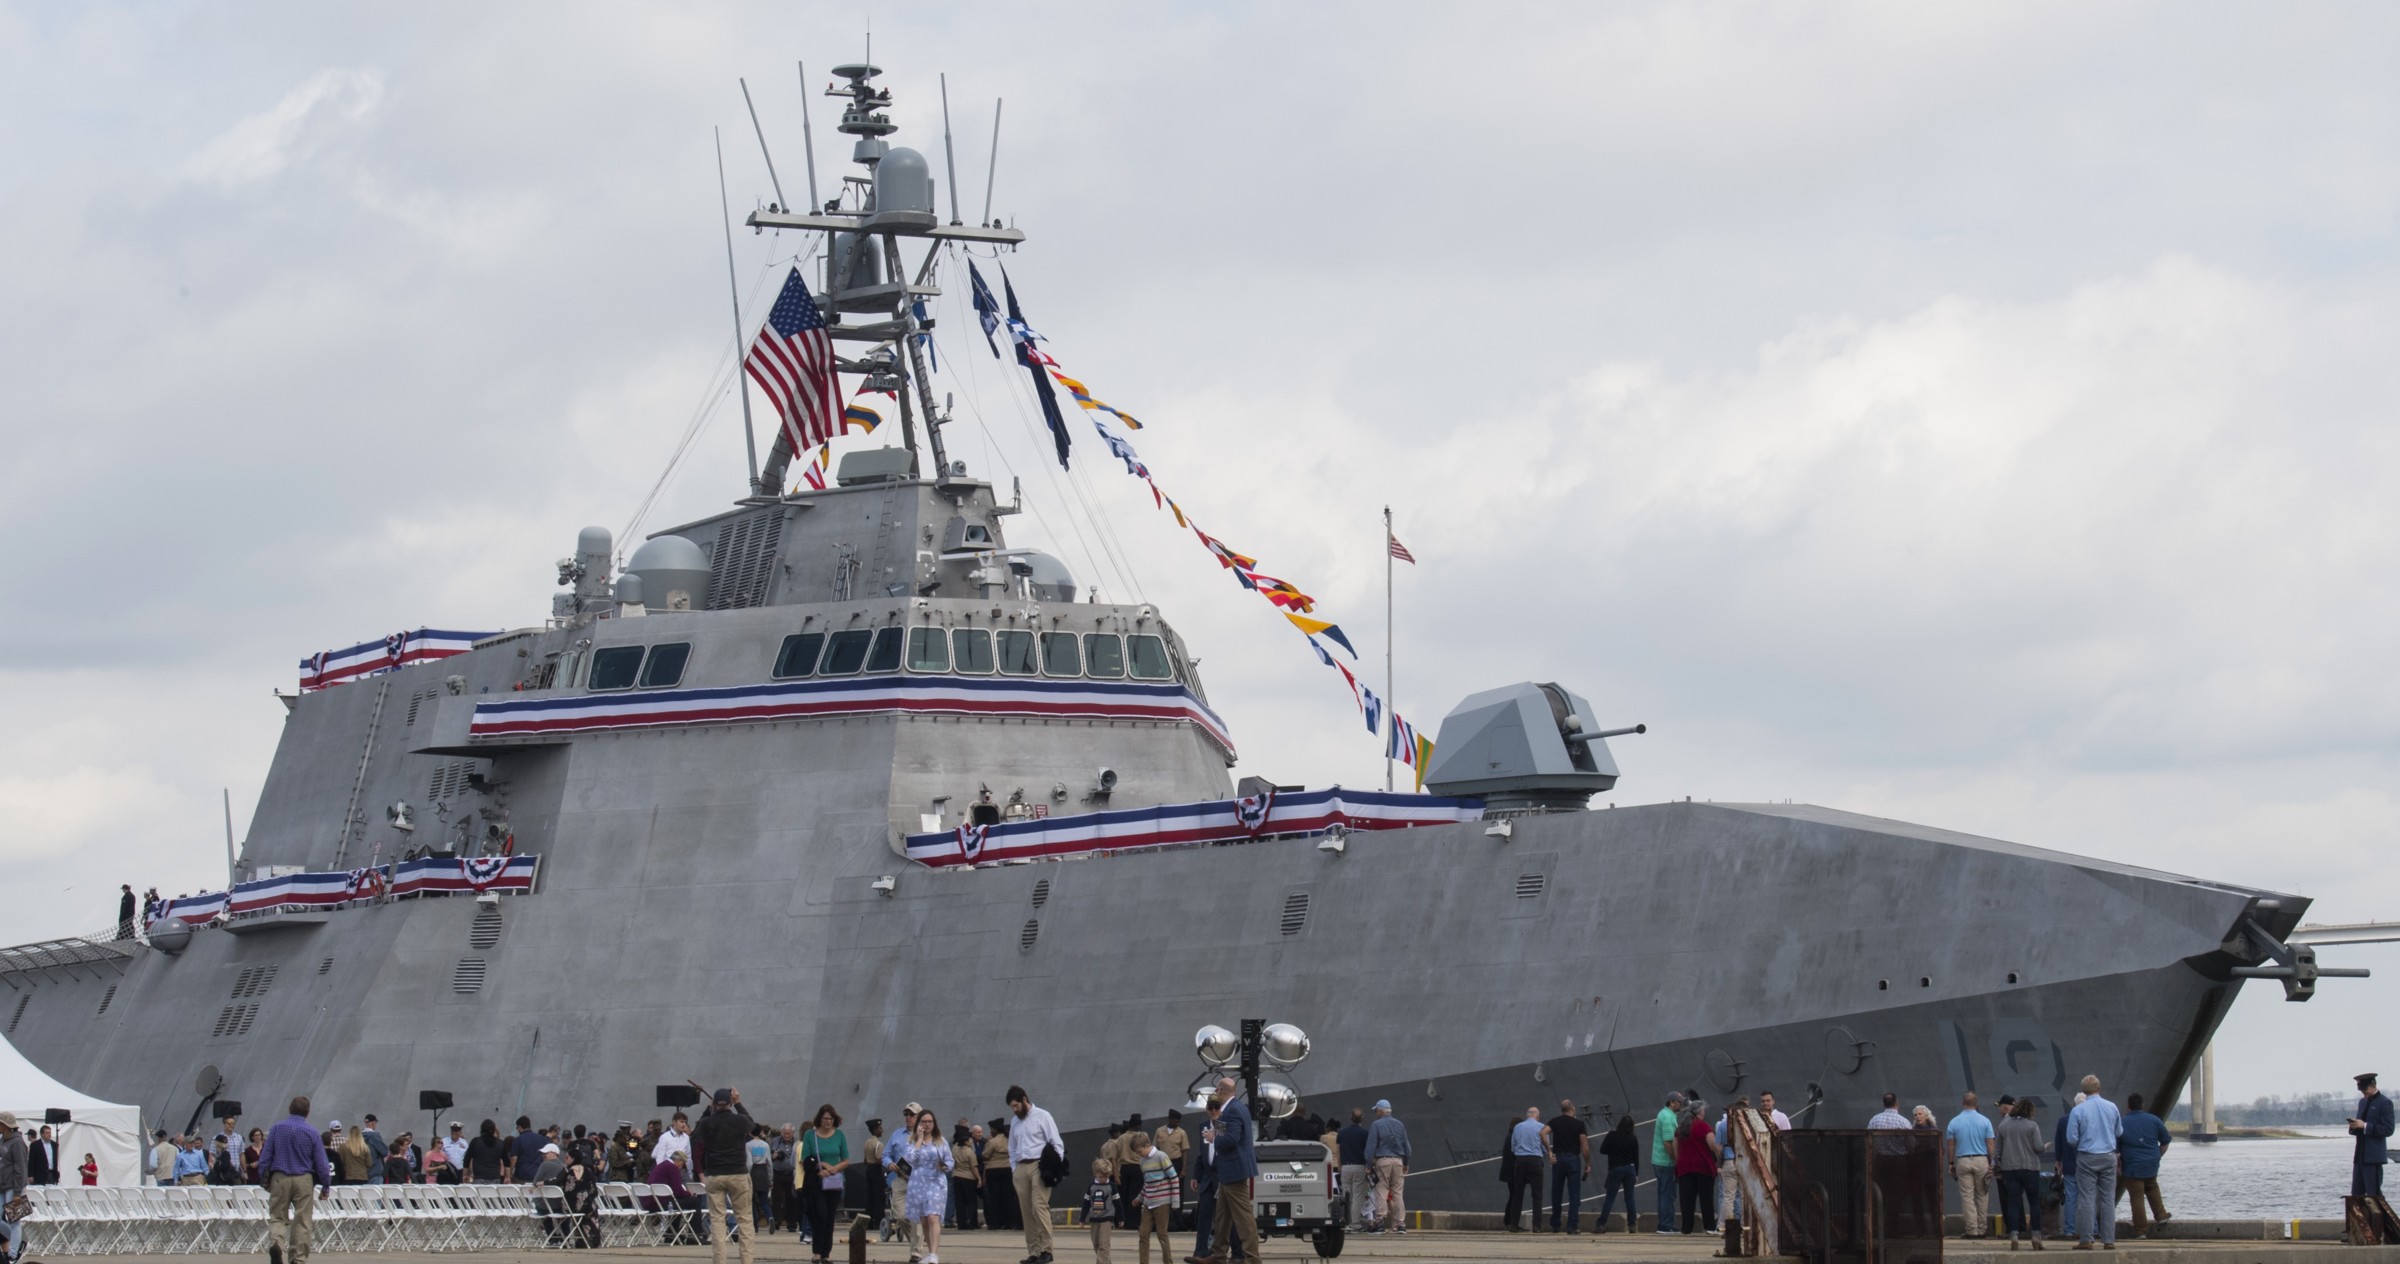 lcs-18 uss charleston littoral combat ship independence class us navy 10 commissioning south carolina